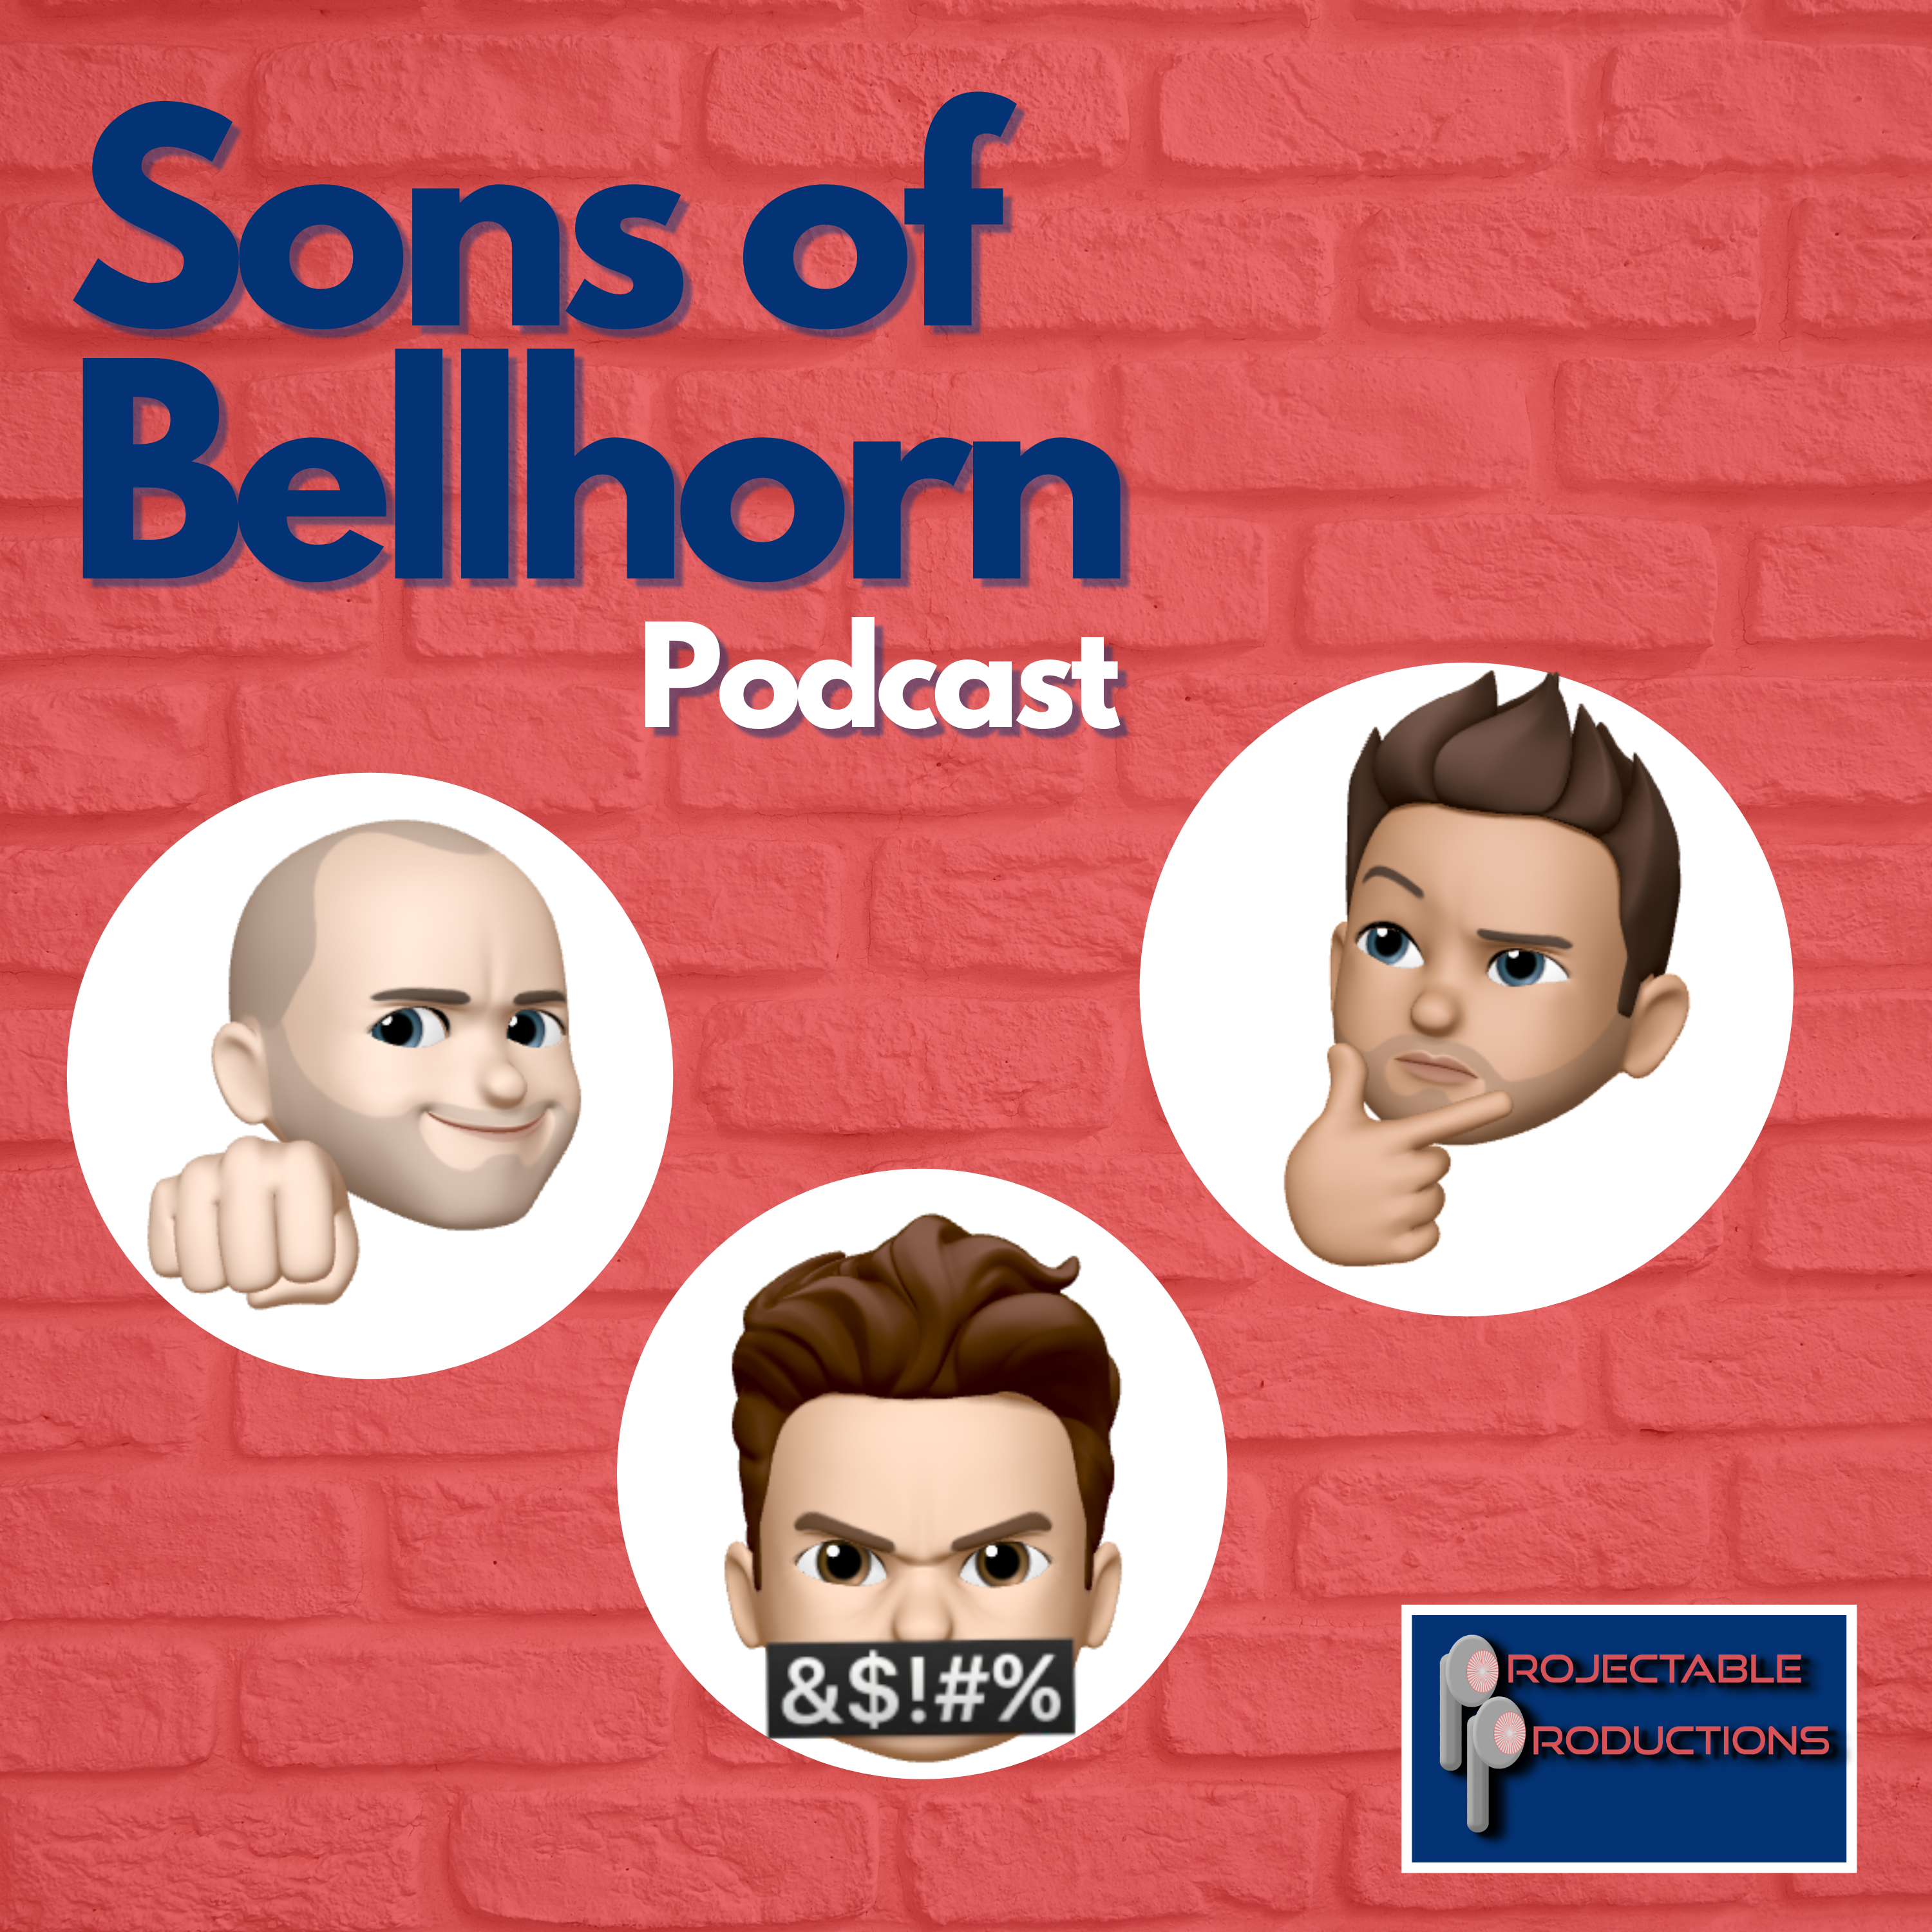 Welcome to the Sons of Bellhorn podcast